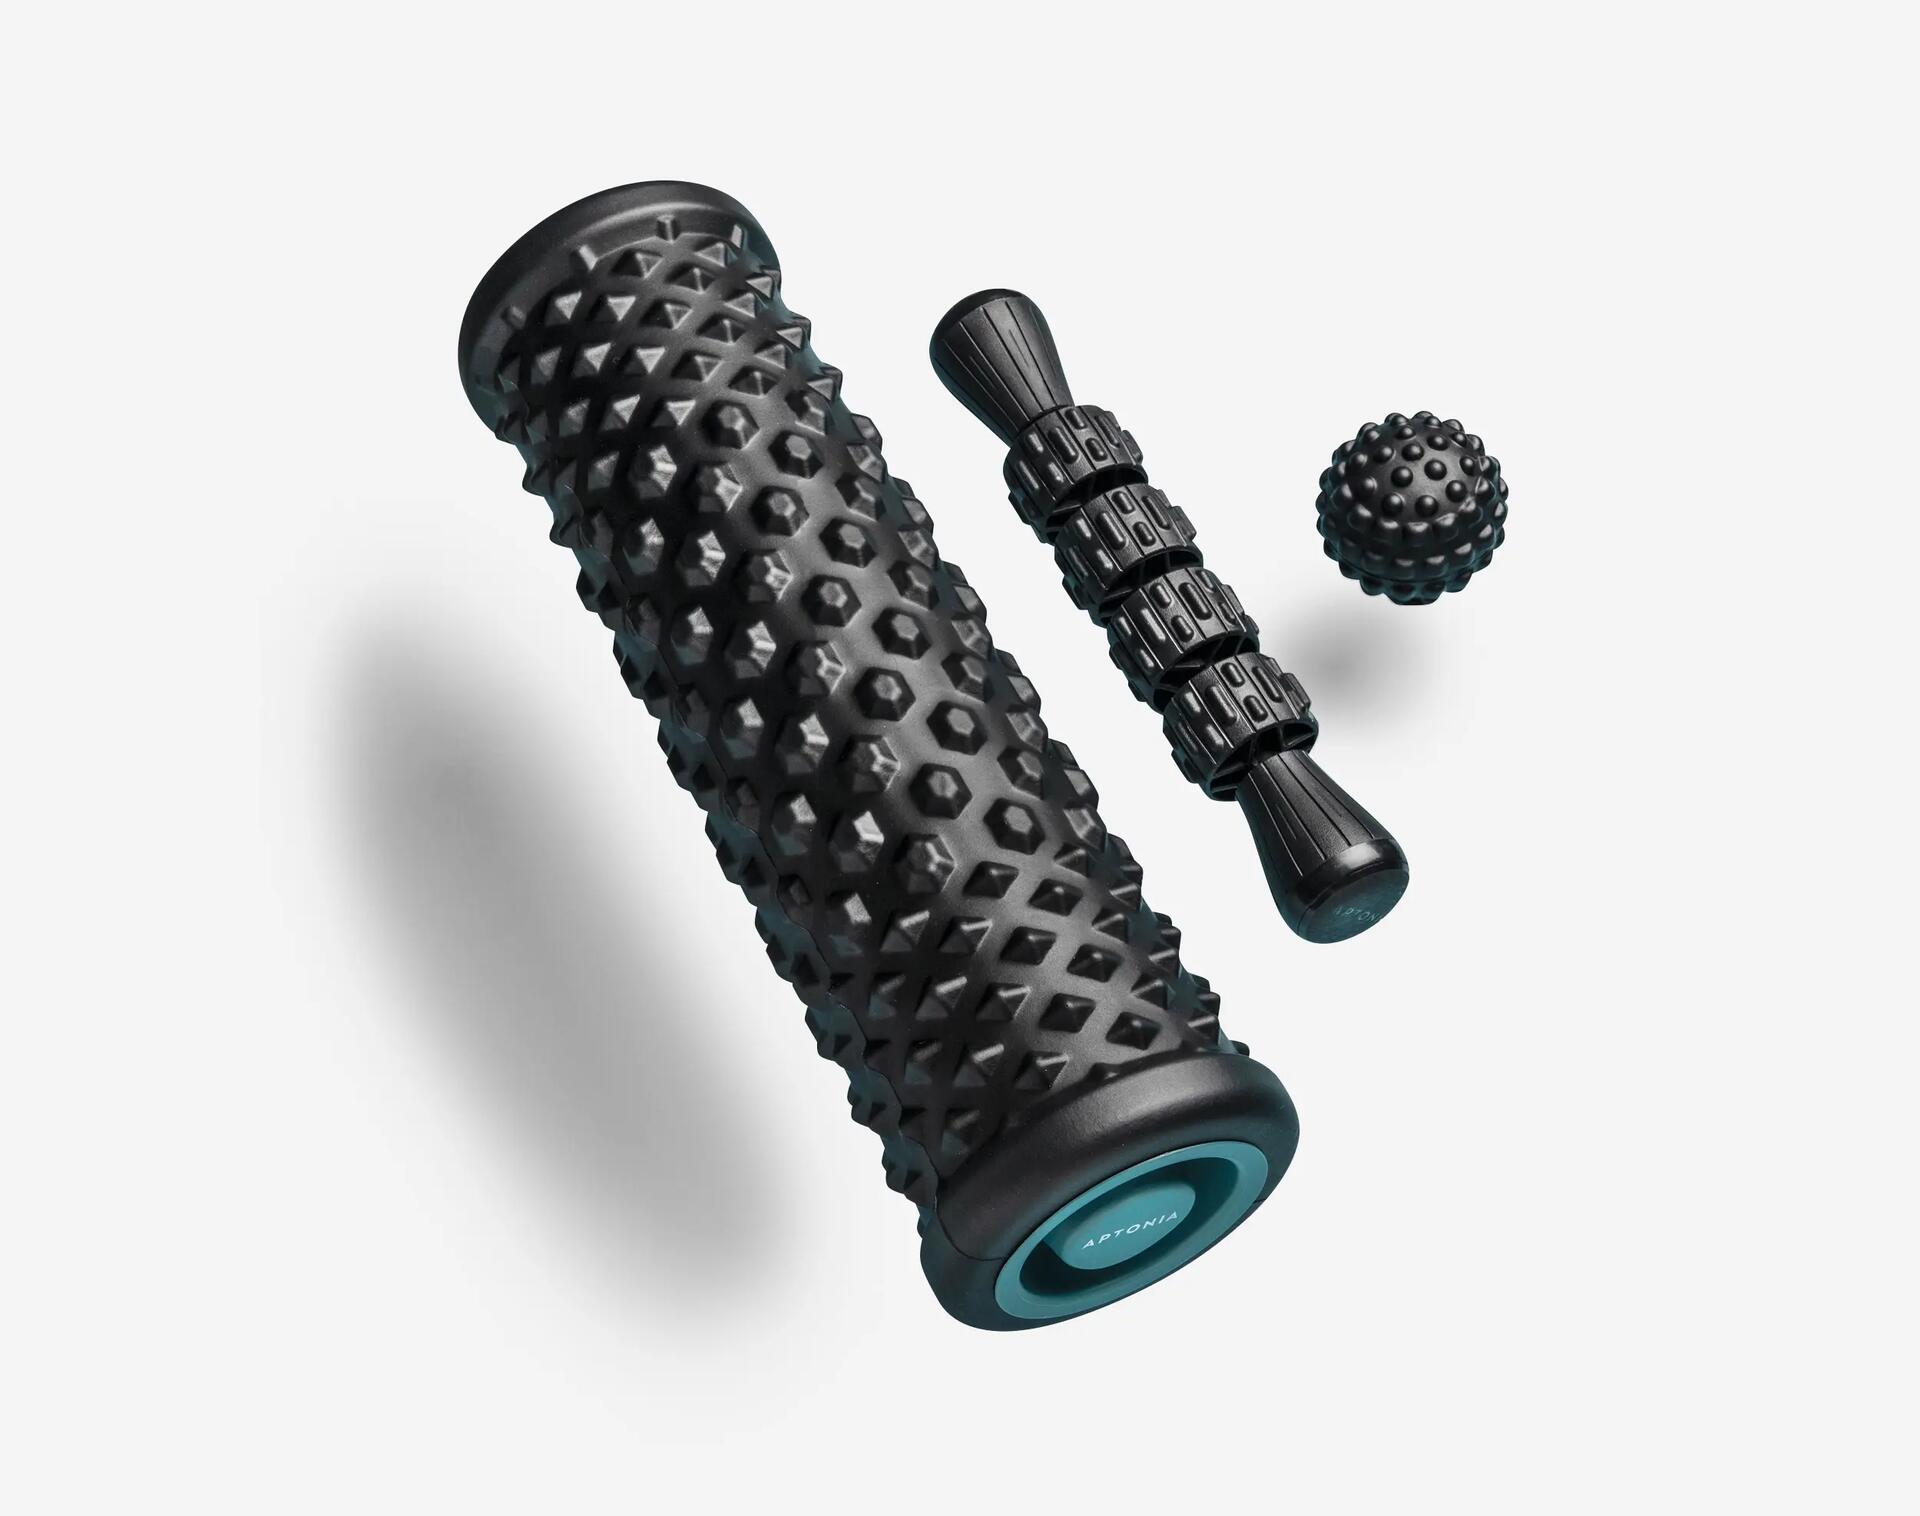 3-in-1 basic massage kit that contains message stick, massage ball, and foam roller. Powerful set to cater different needs. 